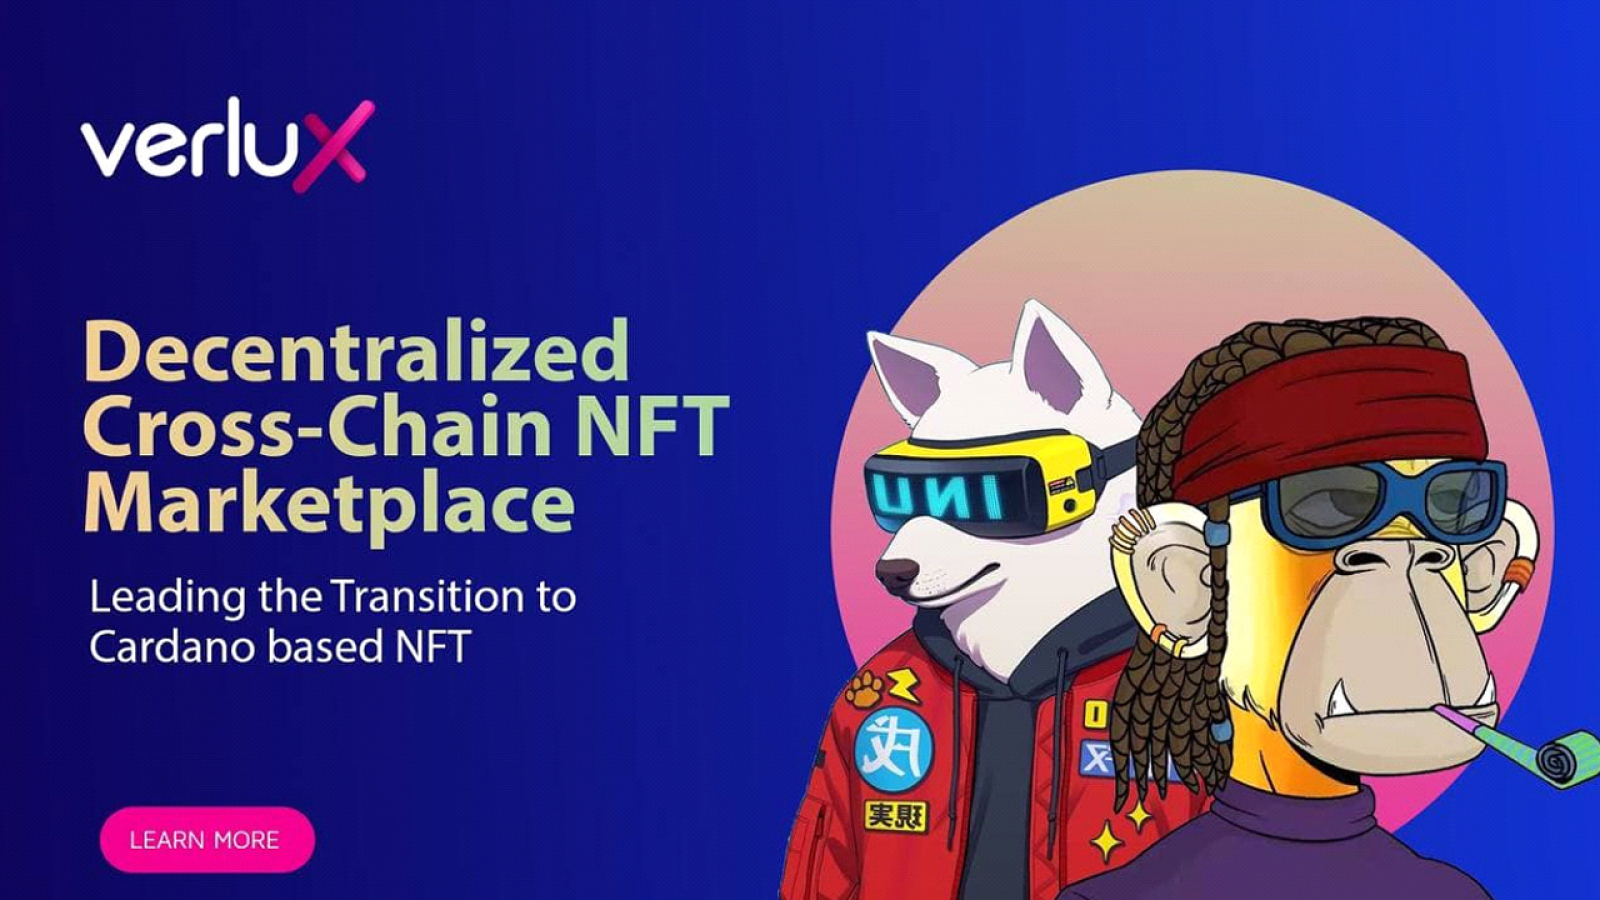 Verlux, A Cardano Based Project Releases Video Demo Of Their Proposed NFT Marketplace as Public Sale Kicks off